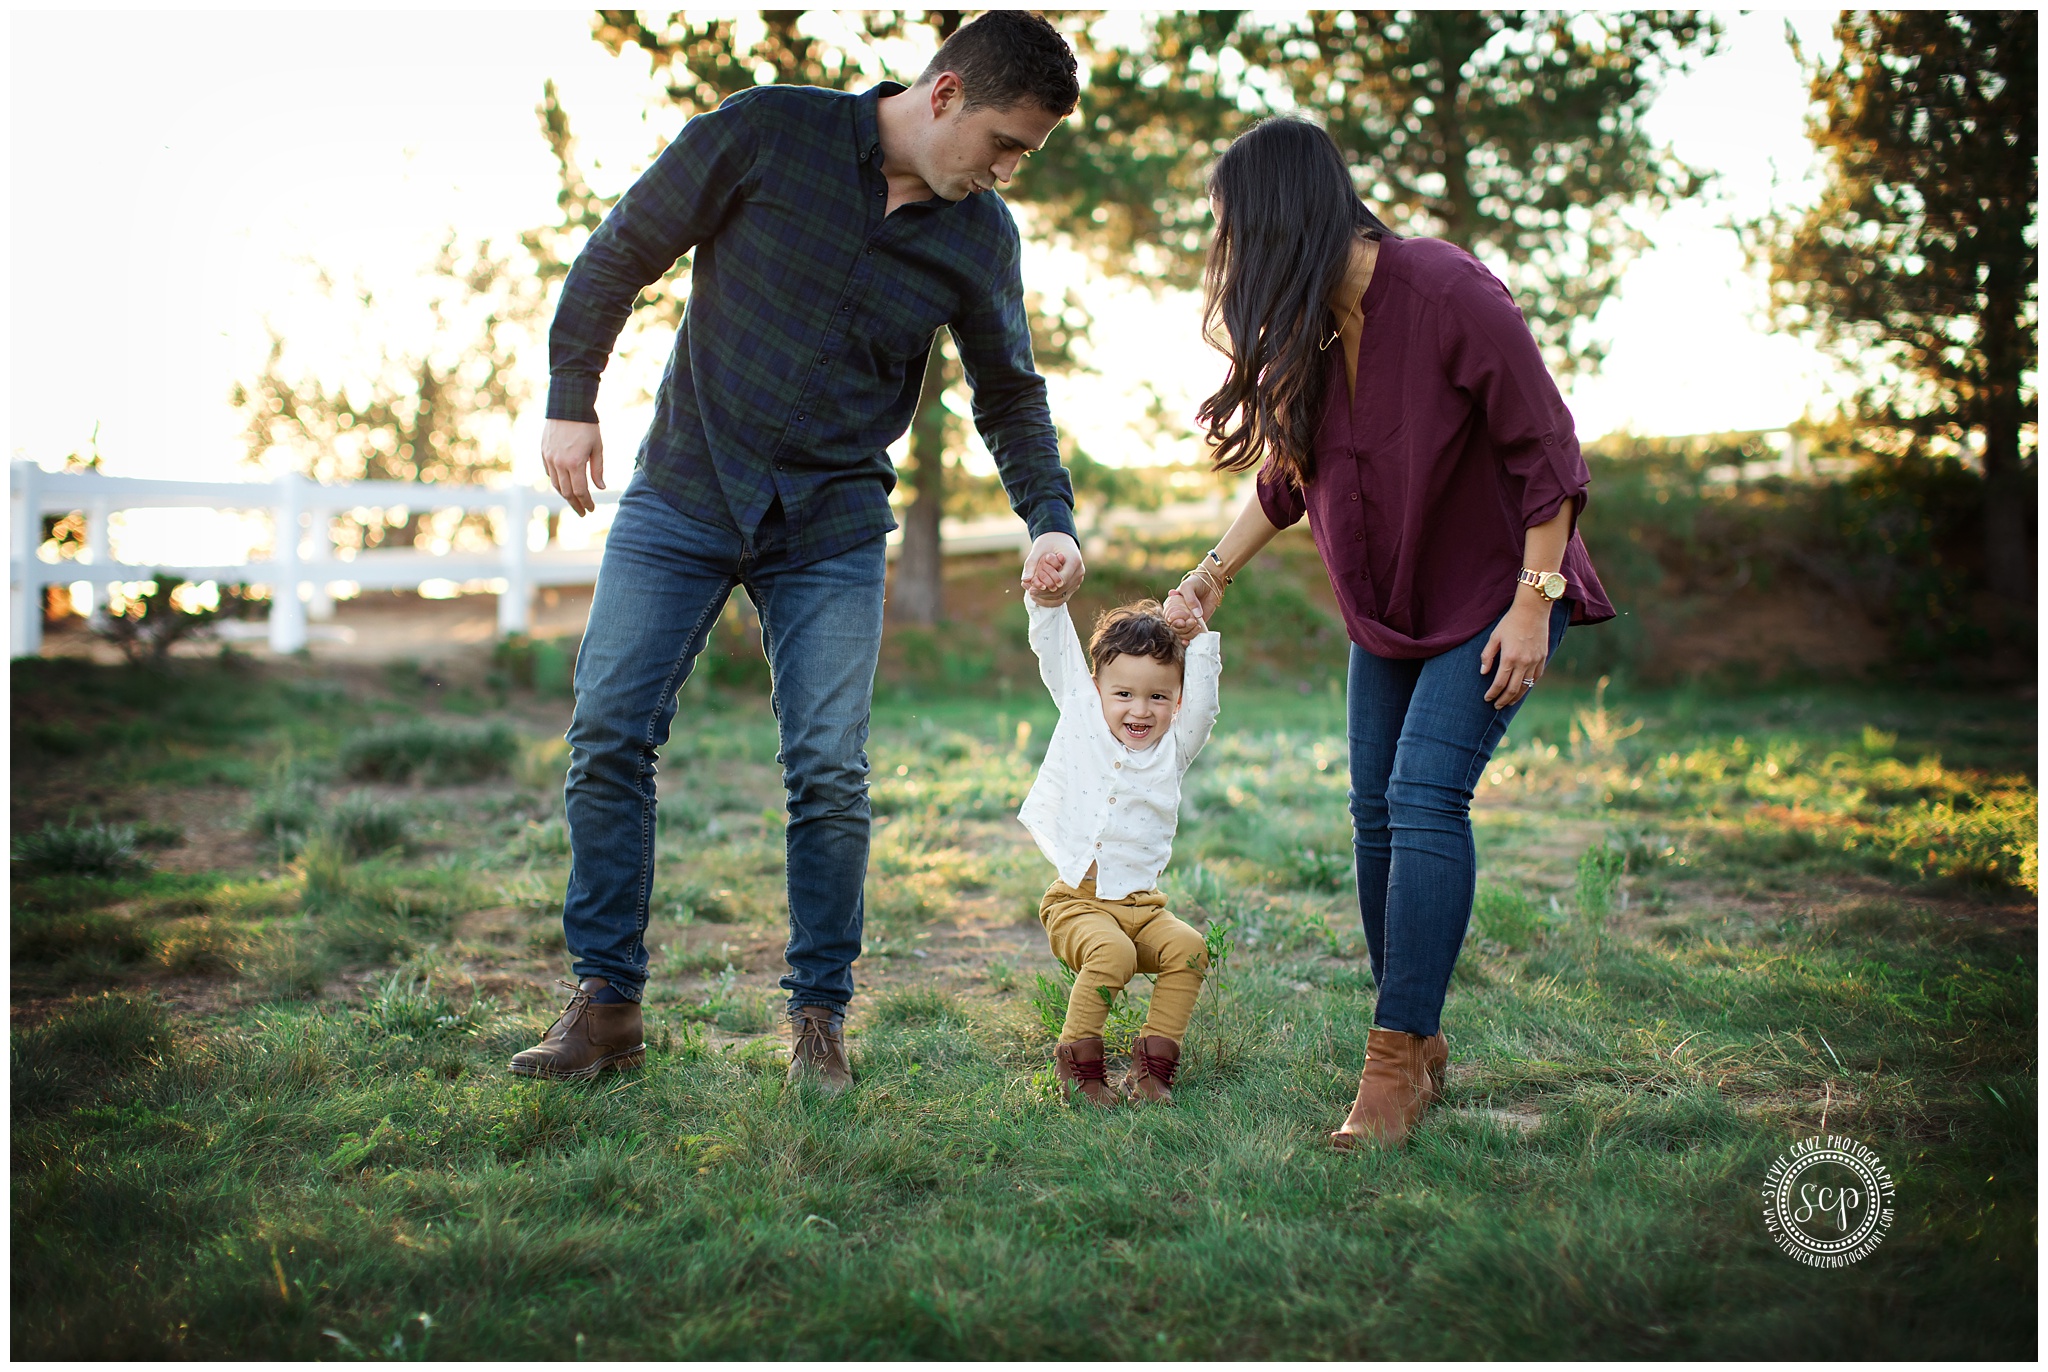 the in between moments are best to photograph during family portraits. Photos by Stevie Cruz Photography